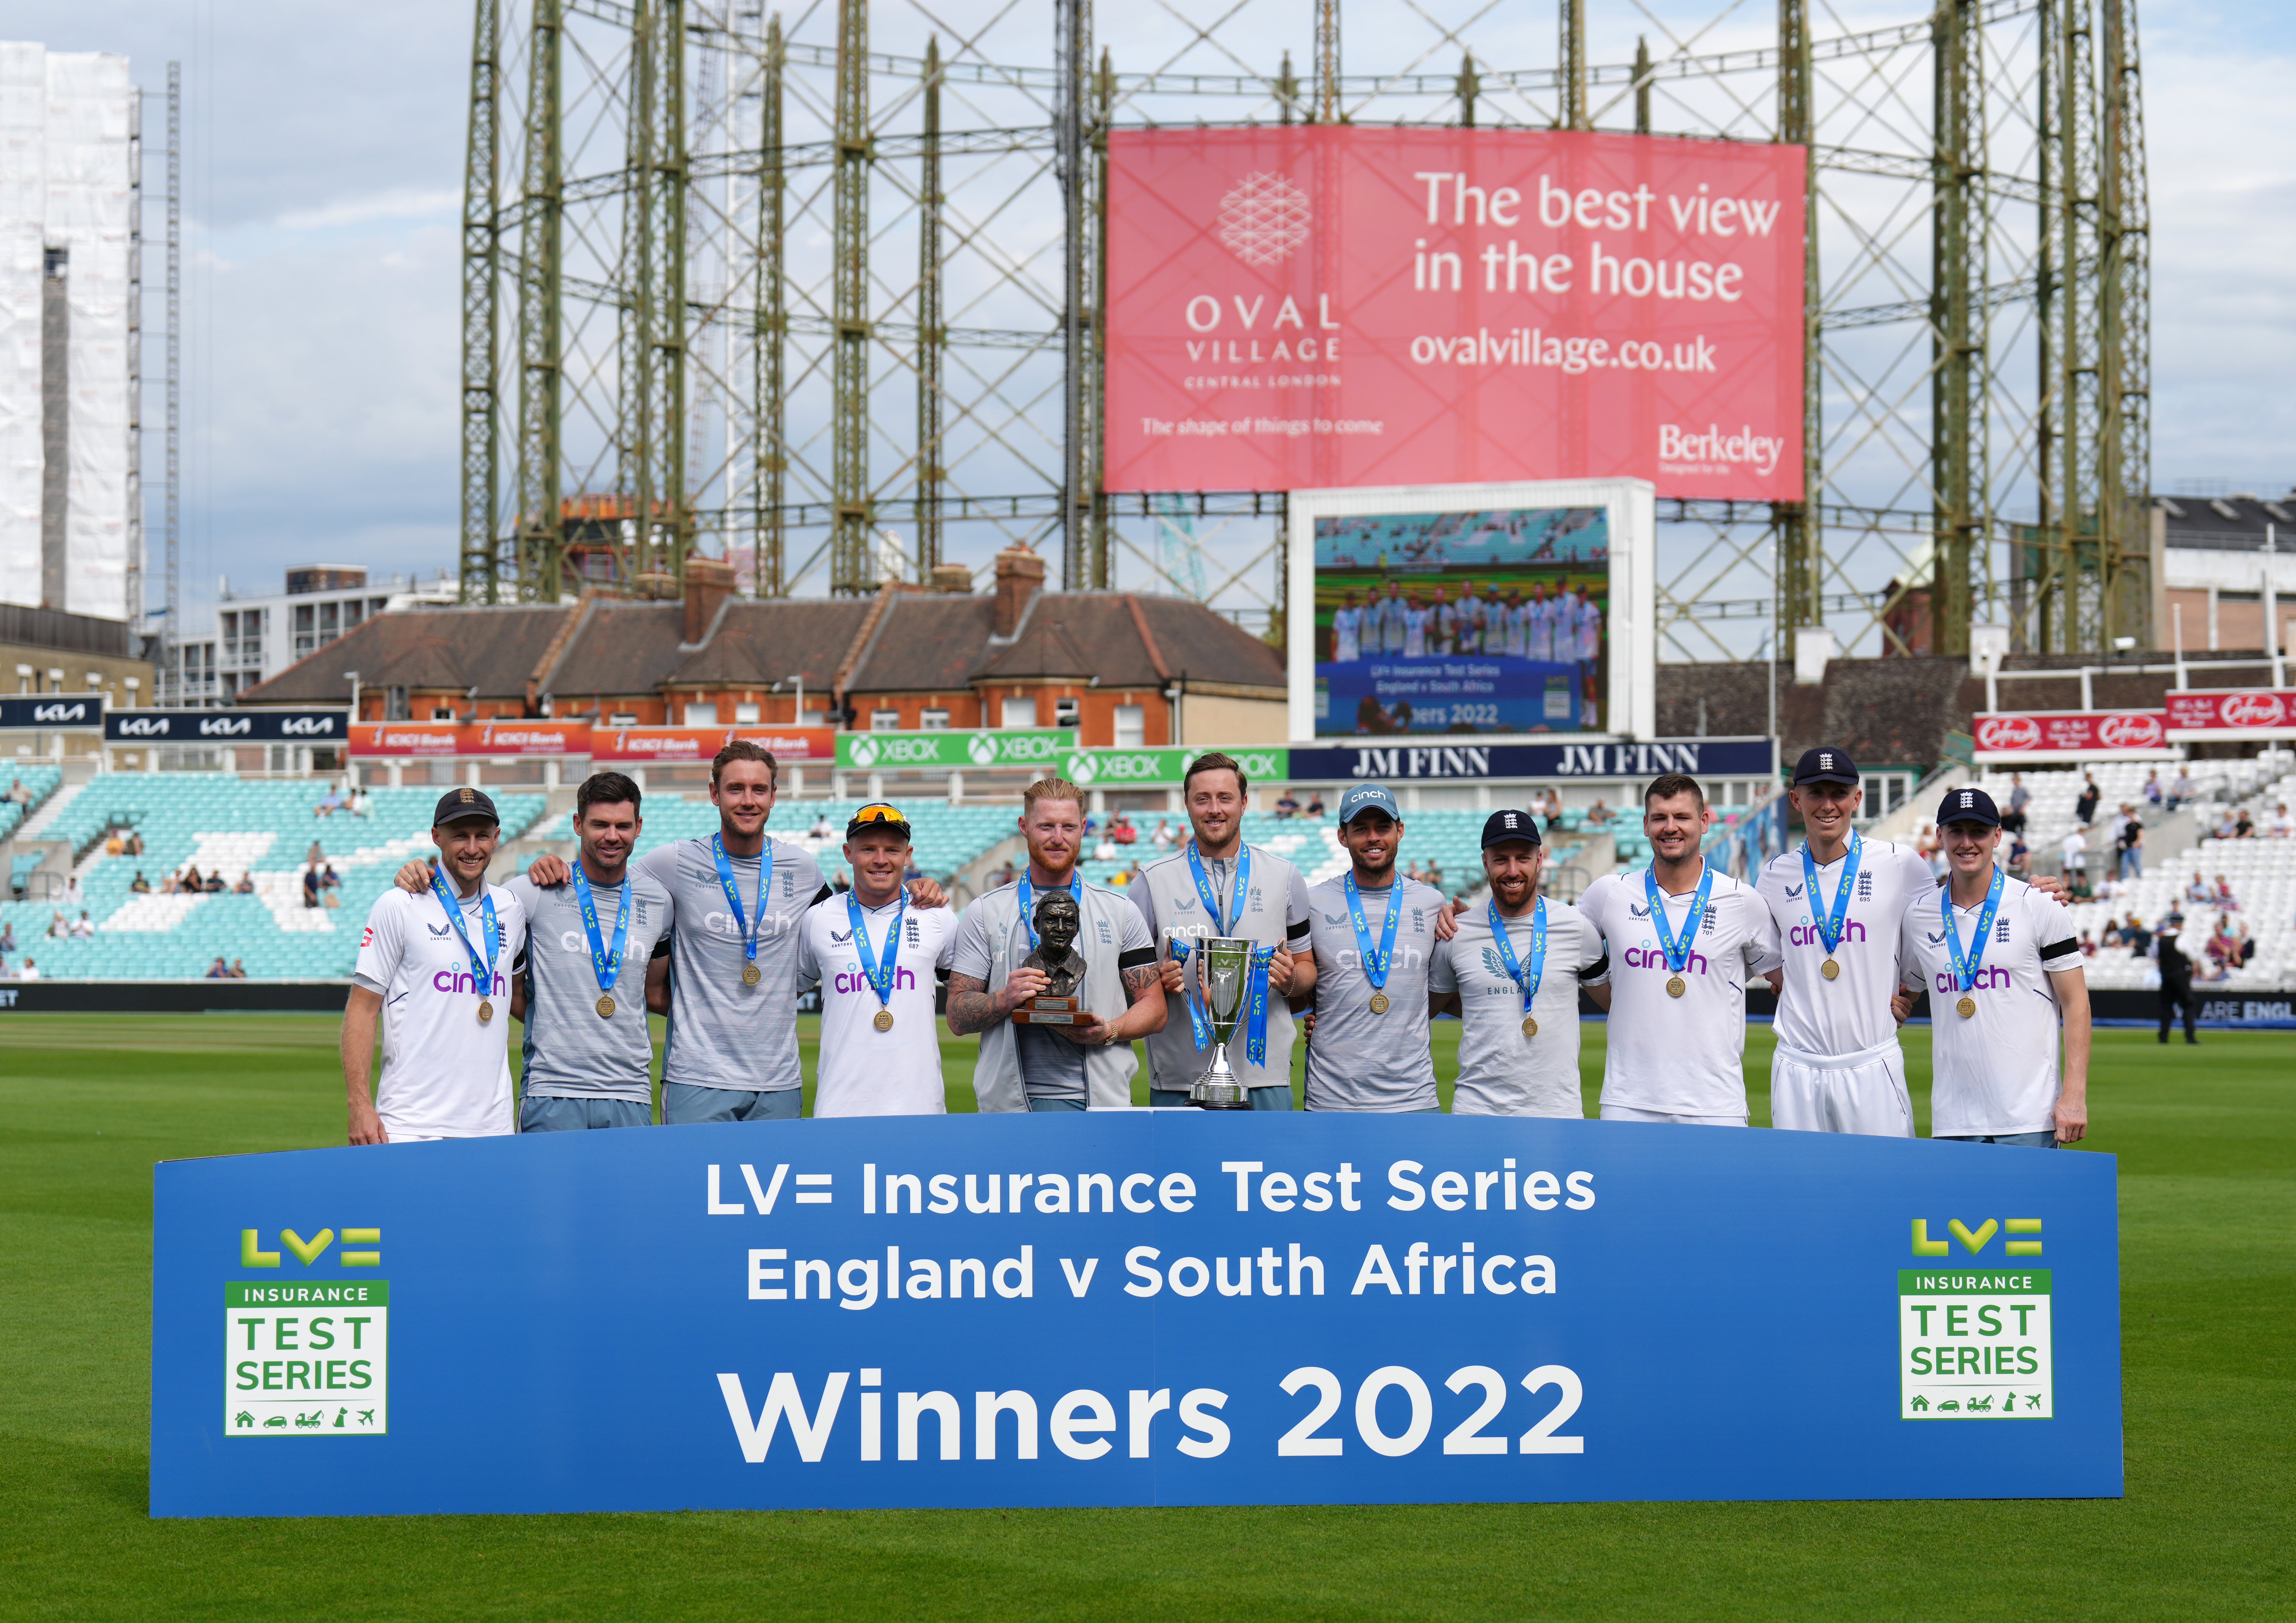 The England team pose with the trophy after winning the series (John Walton/PA)